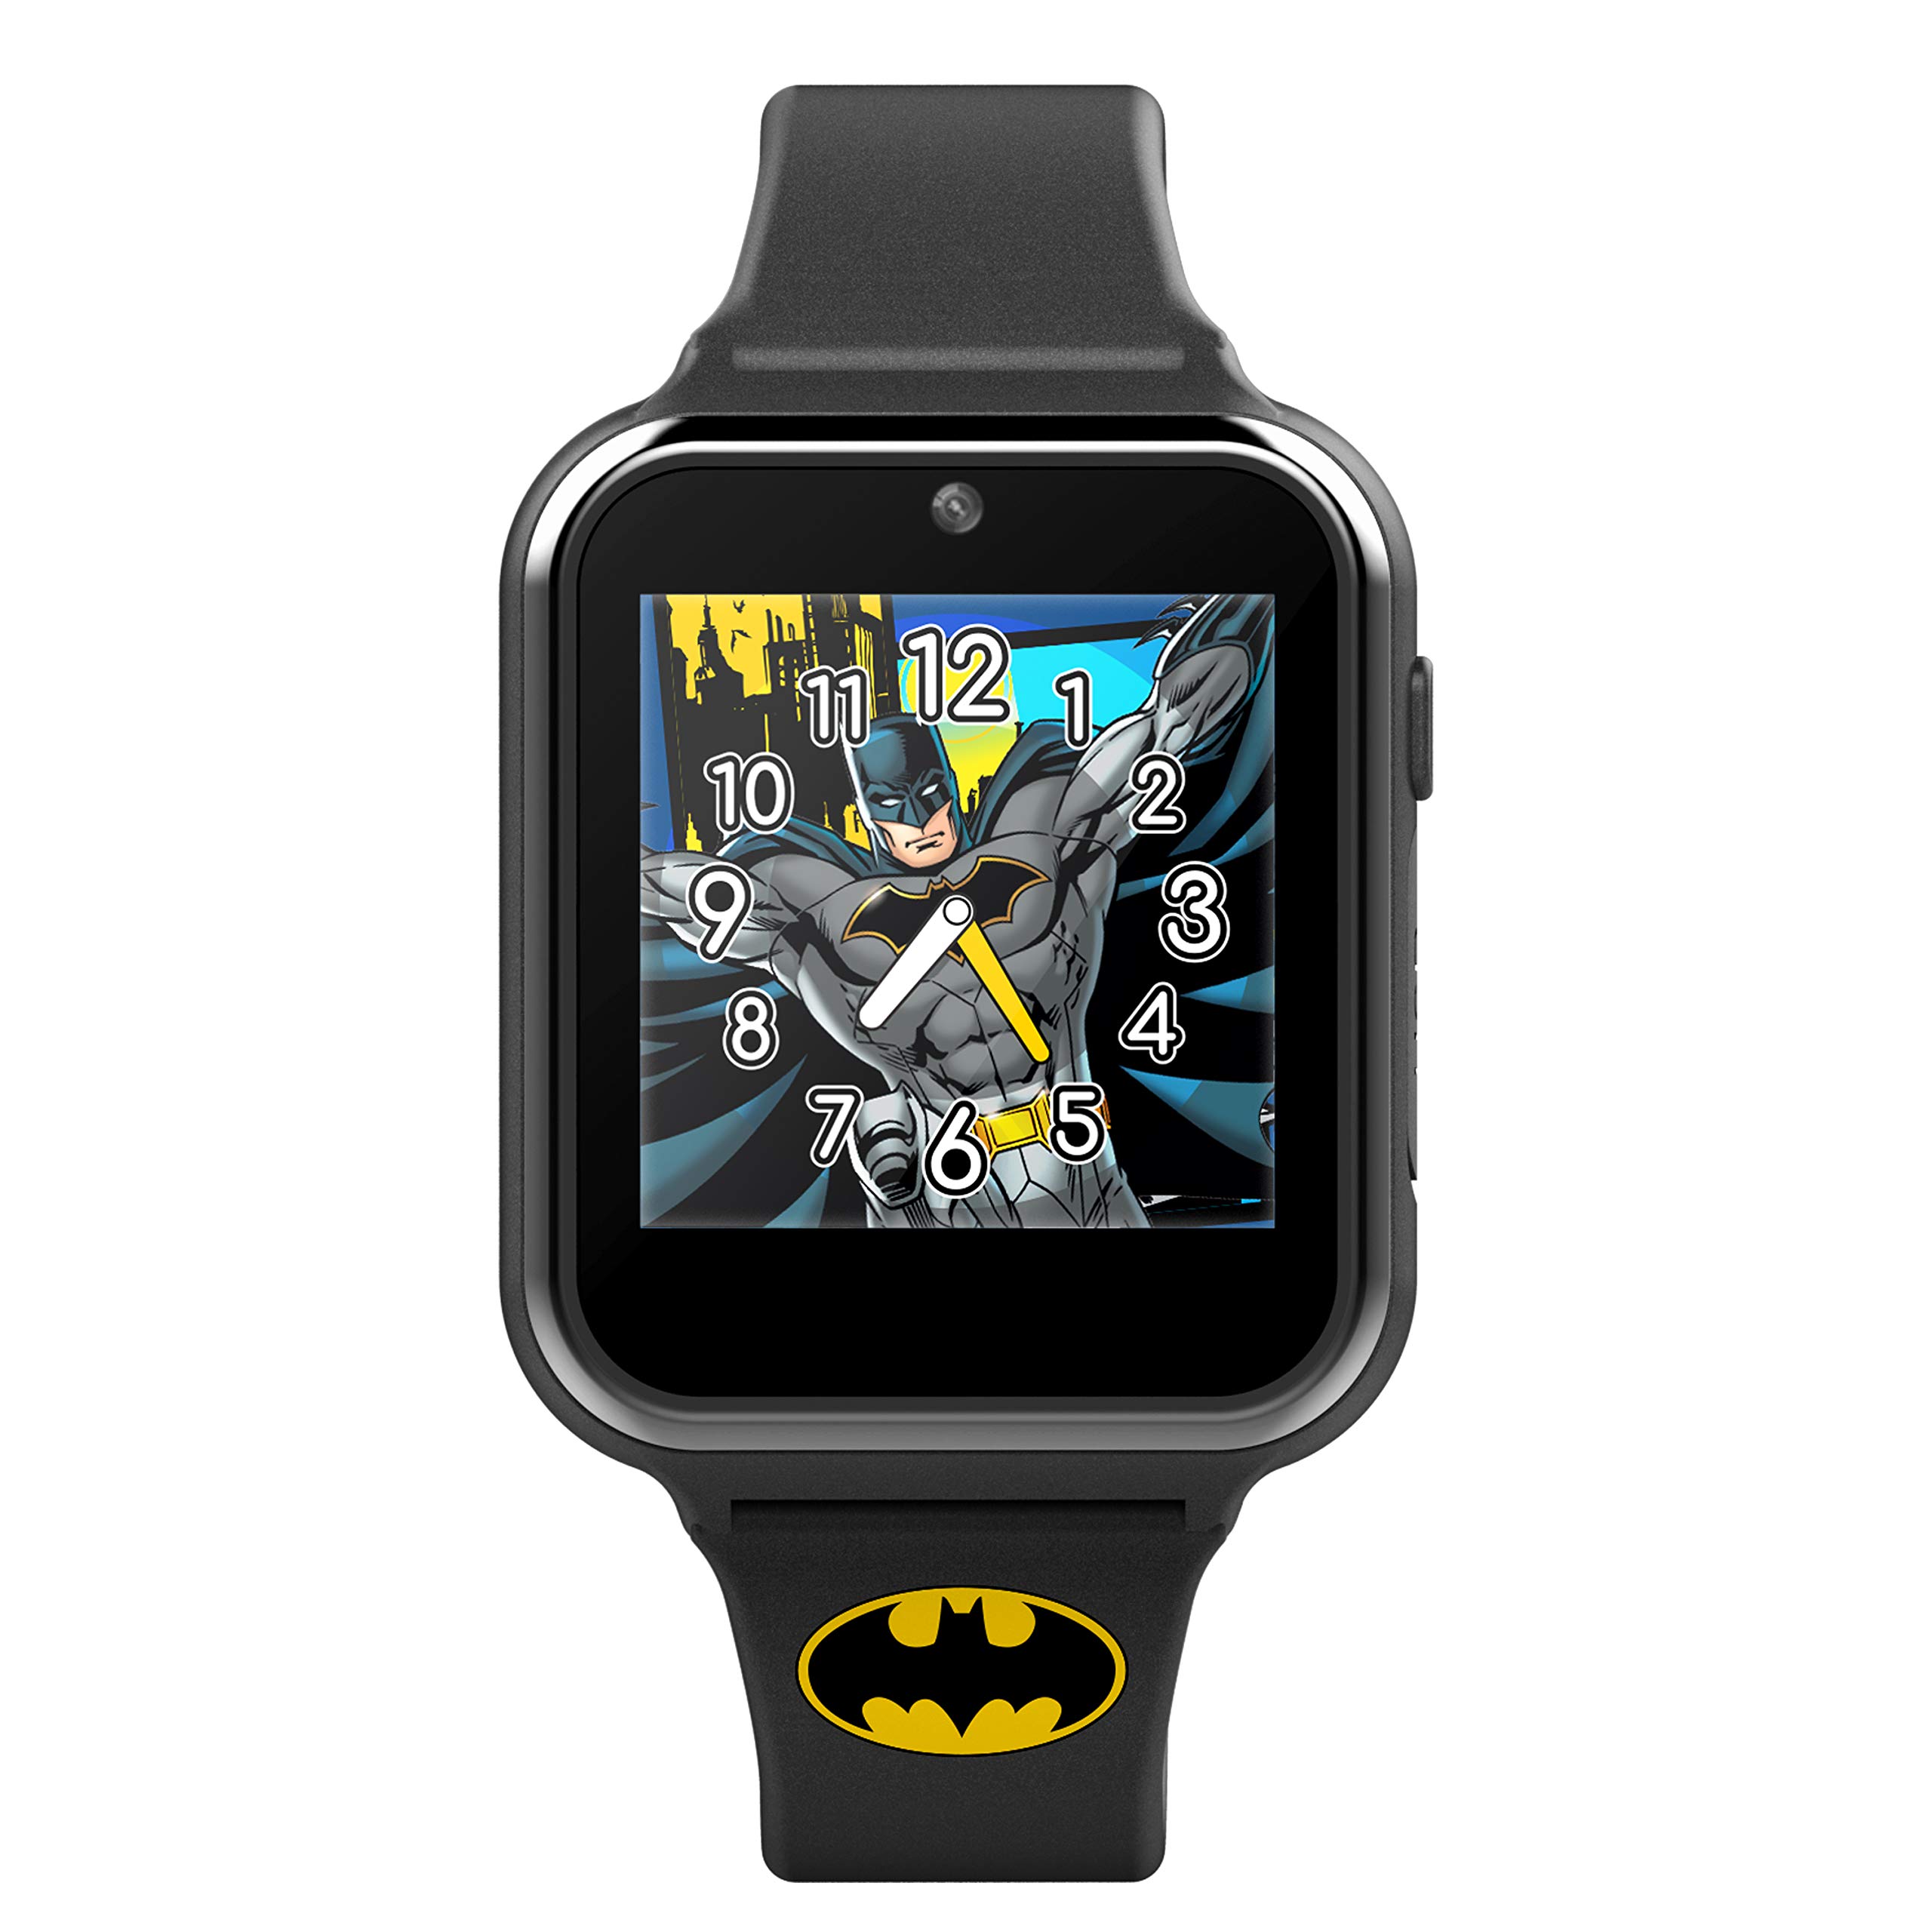 Accutime Kids DC Comics Batman Black Educational Learning Touchscreen Smart Watch Toy for Boys, Girls, Toddlers - Selfie Cam, Learning Games, Alarm, Calculator, Pedometer & More (Model: BAT4740)